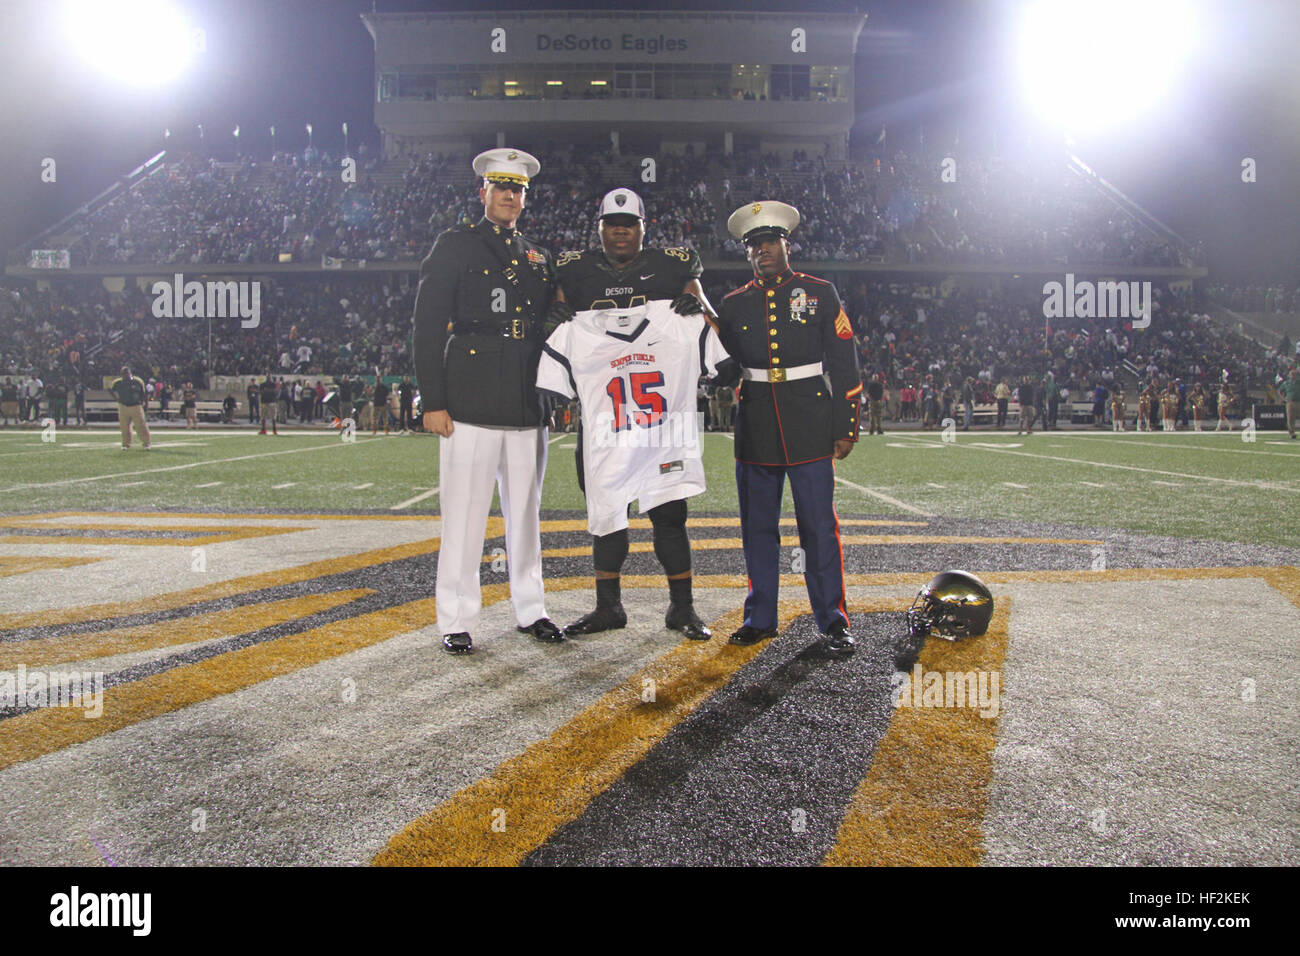 Bryce English, a defensive tackle from Desoto High School selected to play in the 2015 Semper Fidelis All-American Bowl, receives his jersey from Maj. Charles Nicol (left), the commanding officer of Recruiting Station Dallas, and Sgt. Timothy Clark (right), a recruiter with Recruiting Substation Dallas South, during the halftime ceremony of the Desoto vs. Cedar Hill High School football game Oct. 23. The United States Marine Corps is recognizing exemplary student athletes across the country through the Semper Fi Bowl. Now in its fourth year, the game will feature approximately 100 student athl Stock Photo